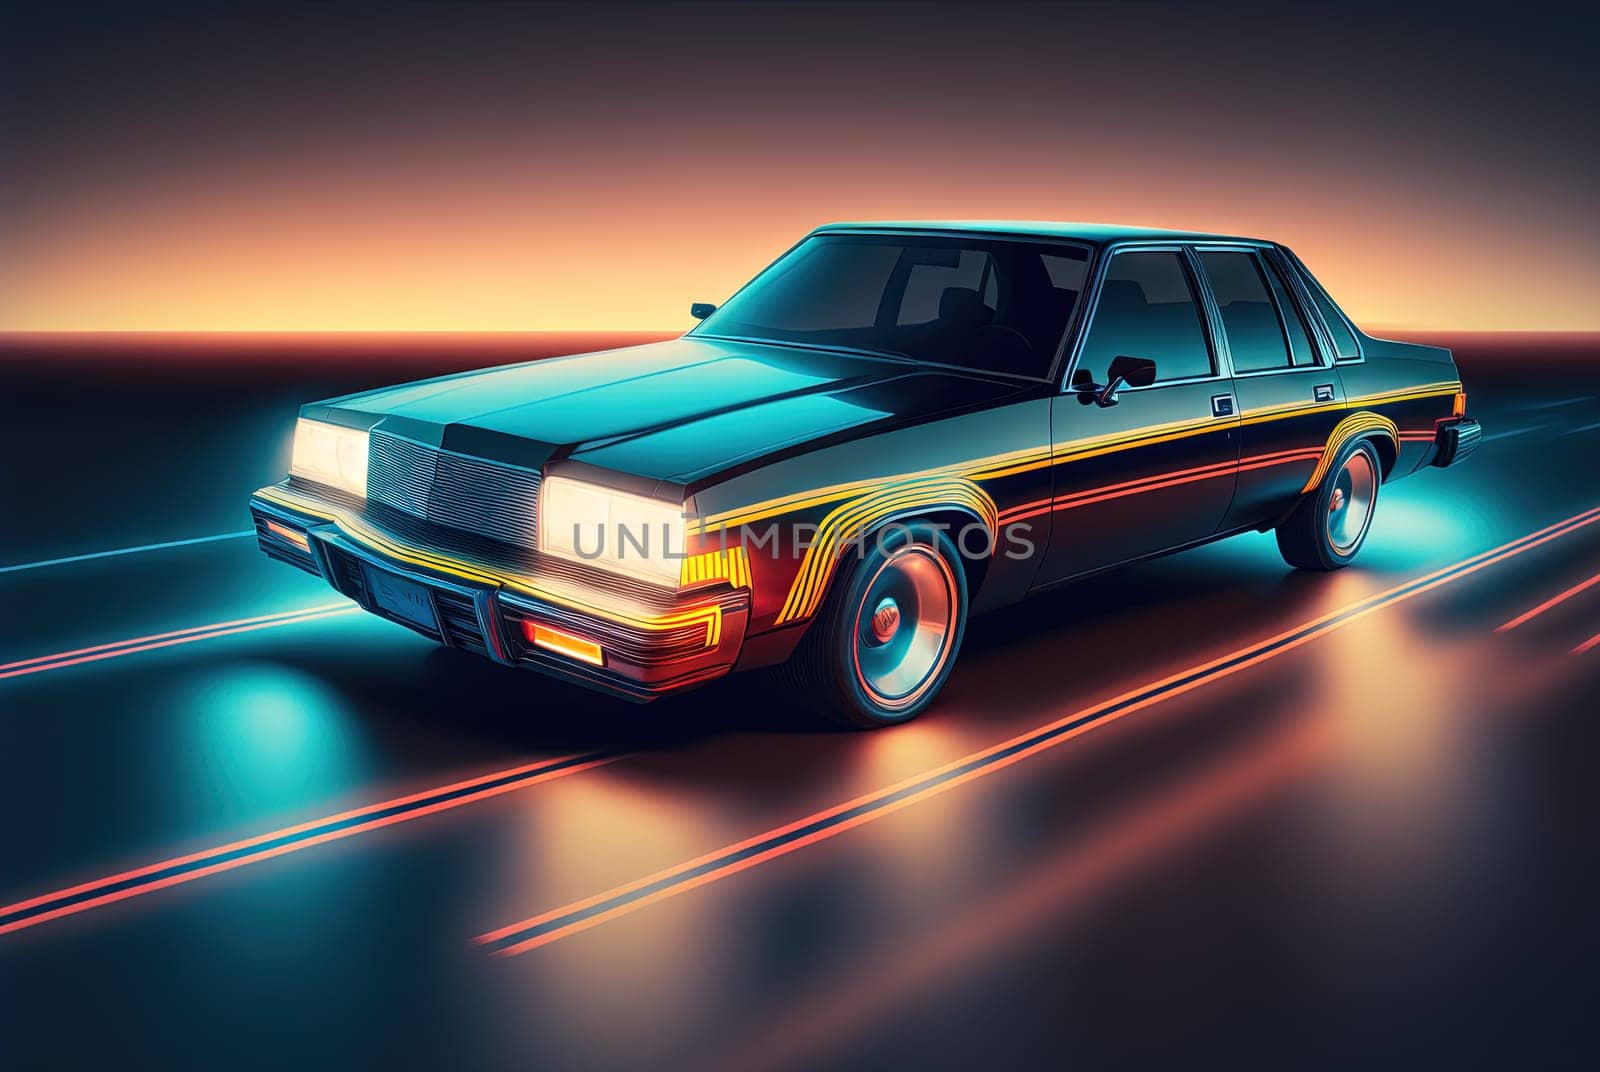 80s styled abstract retro car. Vintage automotive design in neon lights. Generated AI